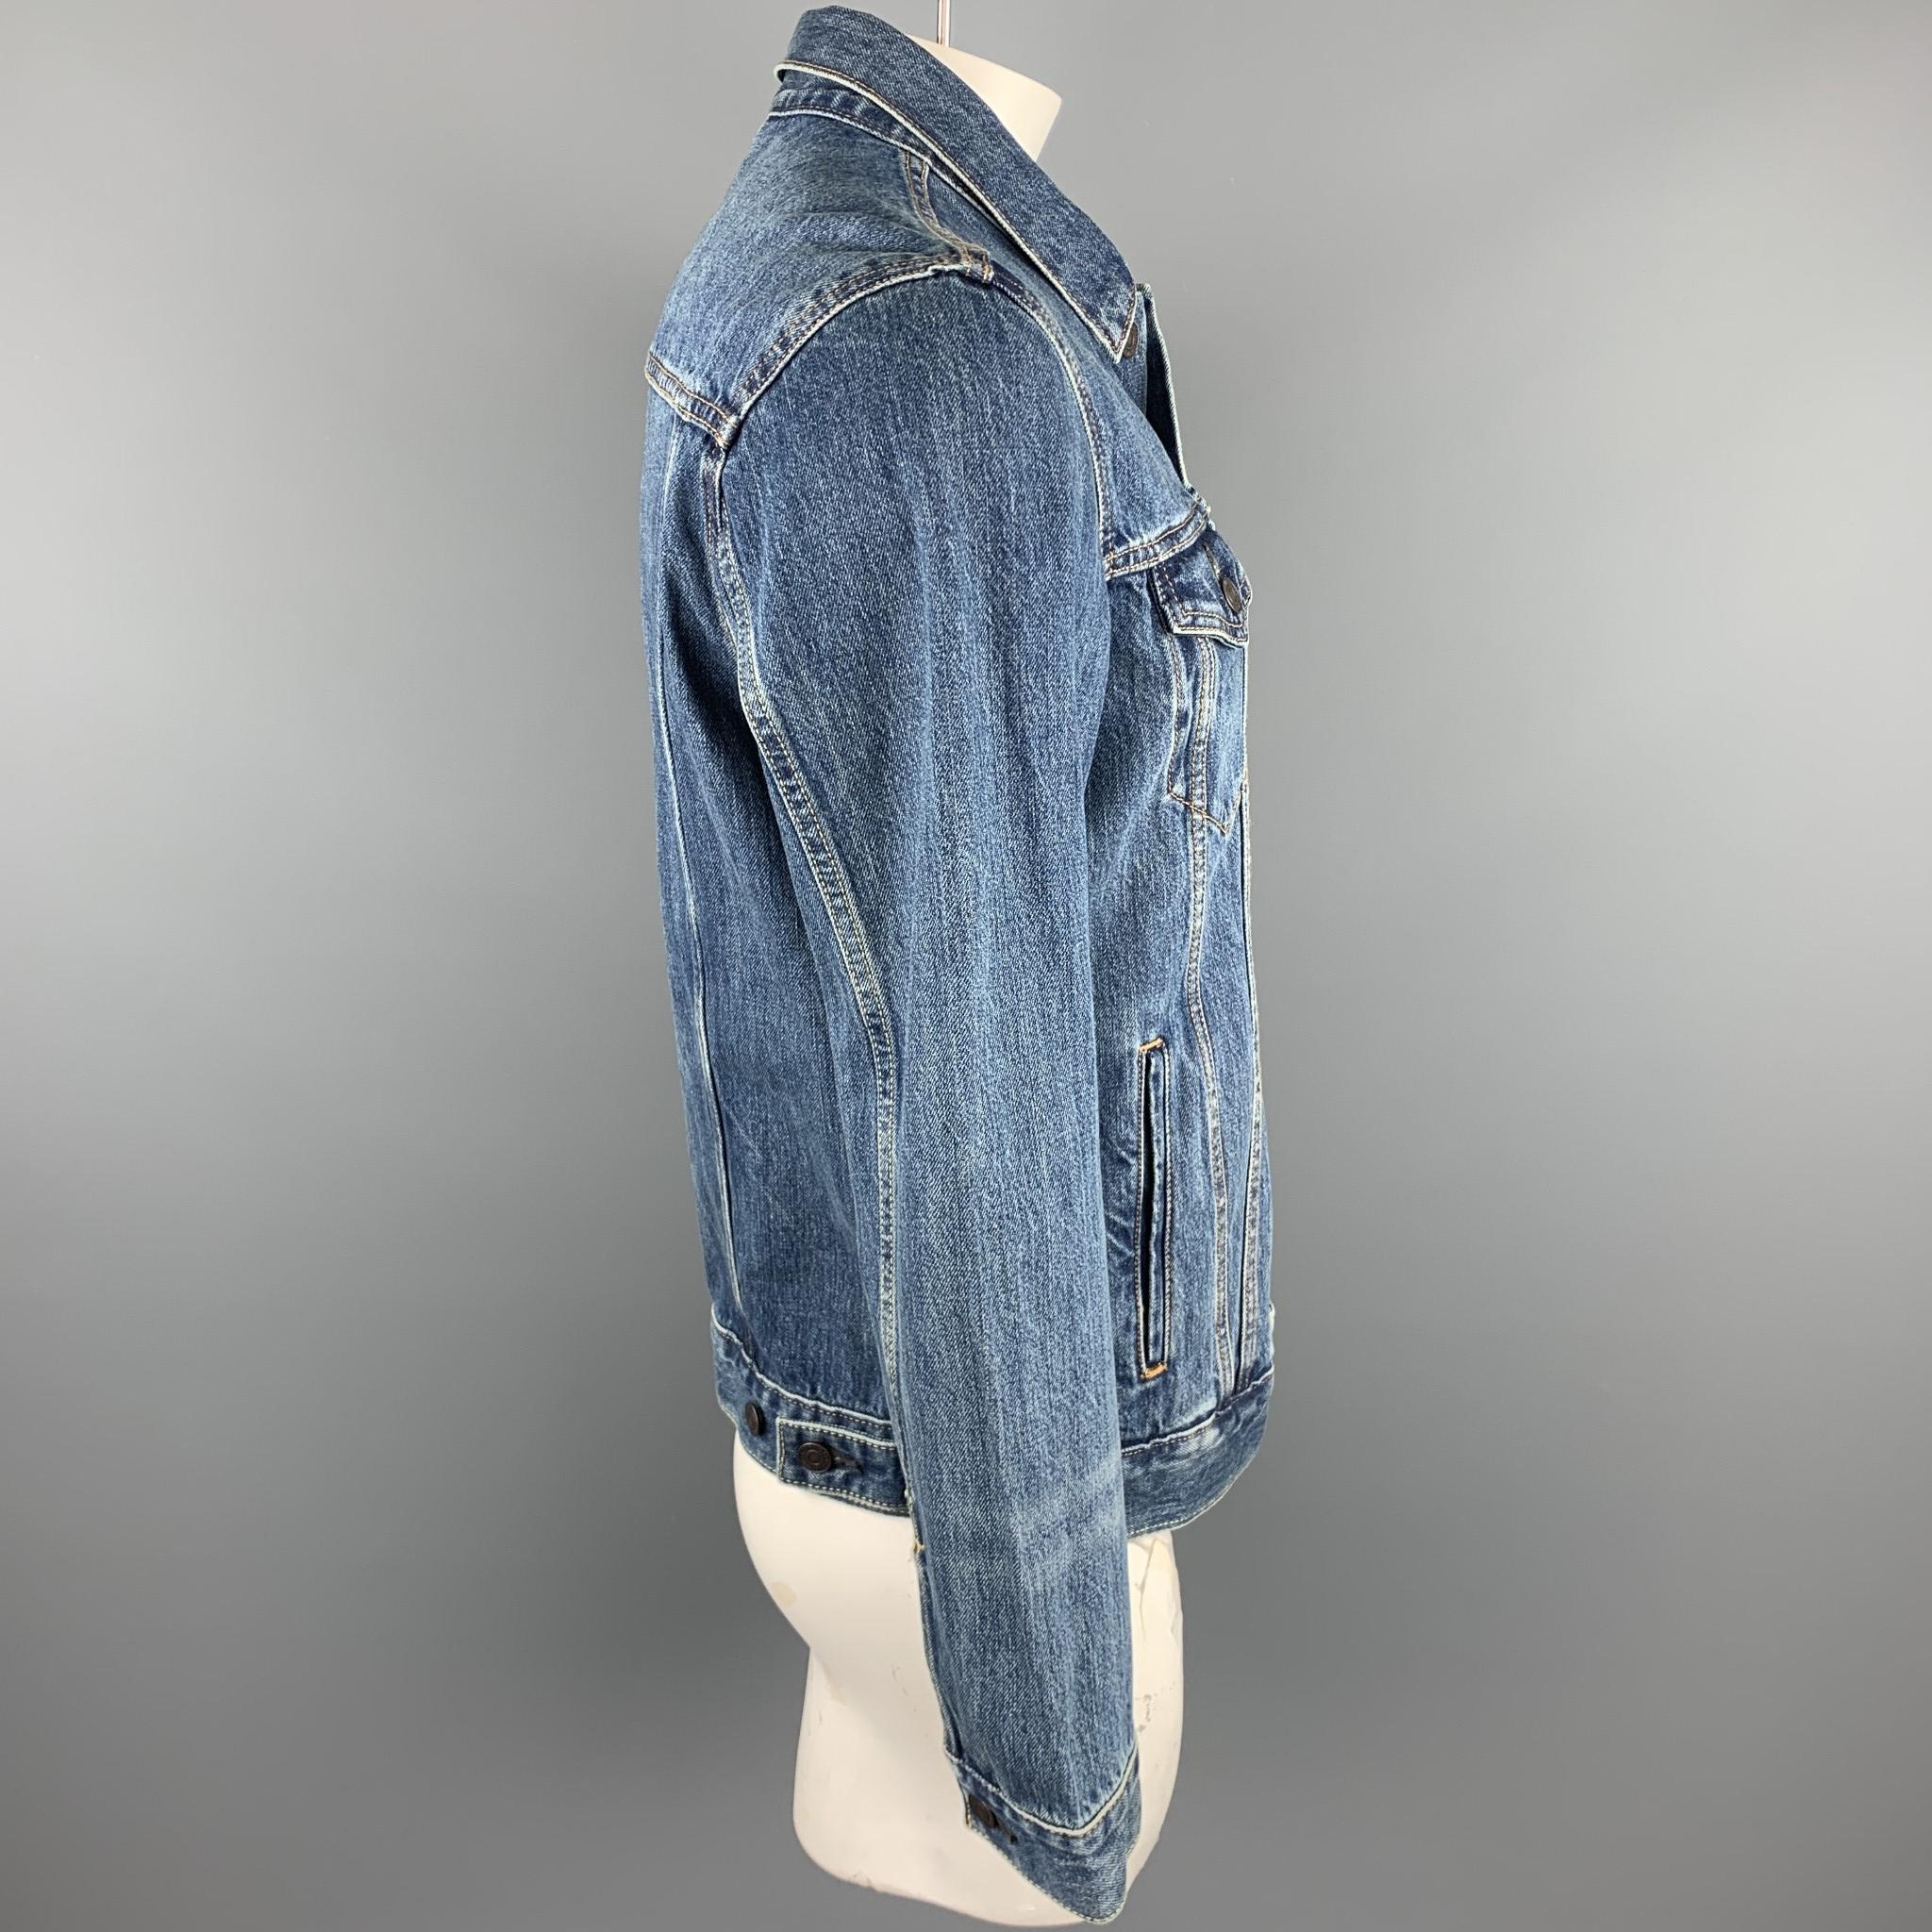 LEVI'S jacket comes in a indigo washed denim with contrast stitching featuring a classic trucker style, patch pockets, slit pockets, spread collar, and a buttoned closure.

Excellent Pre-Owned Condition.
Marked: L

Measurements:

Shoulder: 18.5 in.